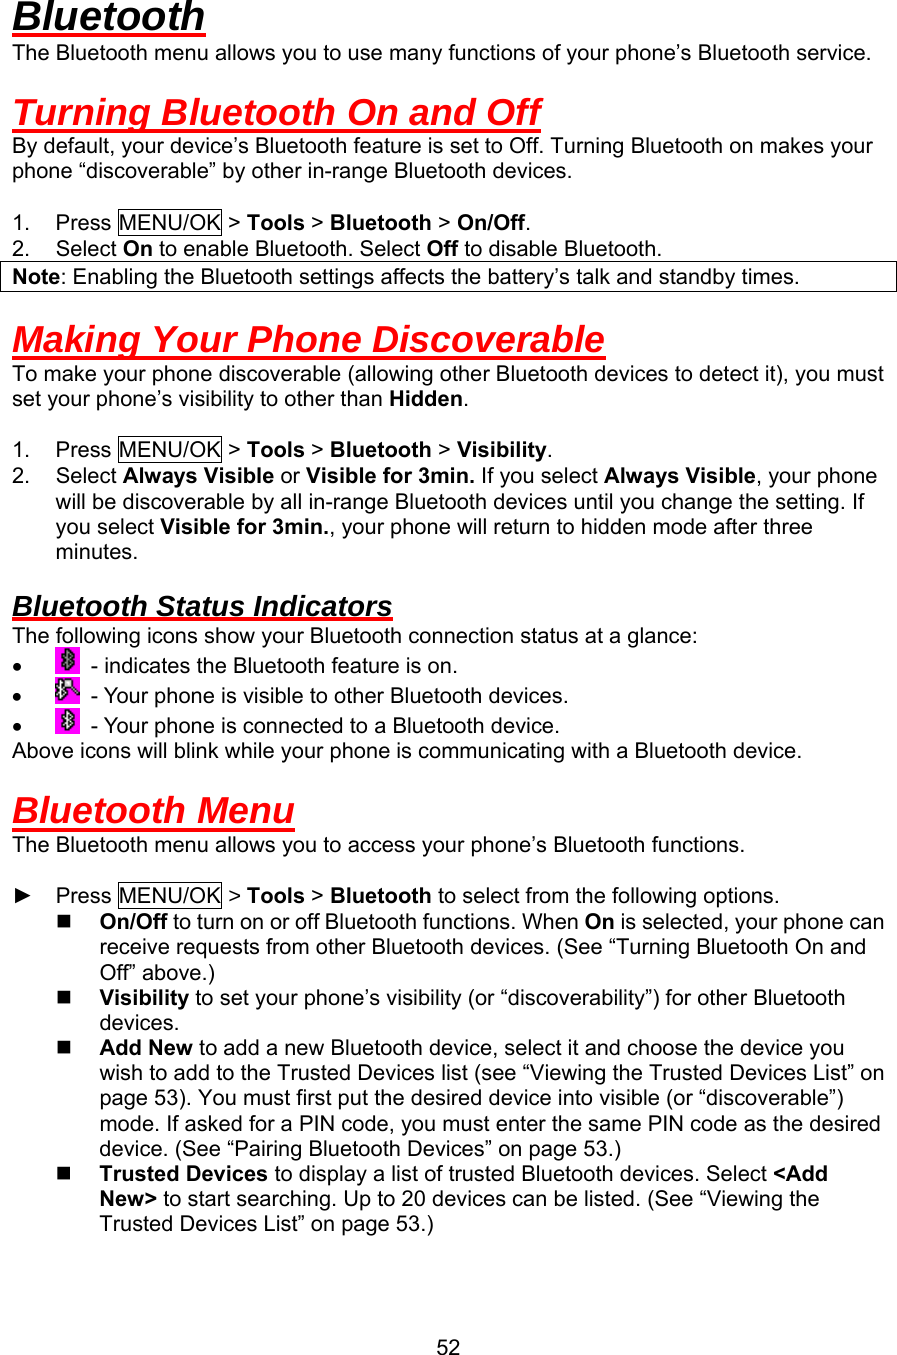 Bluetooth The Bluetooth menu allows you to use many functions of your phone’s Bluetooth service.  Turning Bluetooth On and Off By default, your device’s Bluetooth feature is set to Off. Turning Bluetooth on makes your phone “discoverable” by other in-range Bluetooth devices.  1. Press MENU/OK &gt; Tools &gt; Bluetooth &gt; On/Off. 2. Select On to enable Bluetooth. Select Off to disable Bluetooth. Note: Enabling the Bluetooth settings affects the battery’s talk and standby times.  Making Your Phone Discoverable To make your phone discoverable (allowing other Bluetooth devices to detect it), you must set your phone’s visibility to other than Hidden.  1. Press MENU/OK &gt; Tools &gt; Bluetooth &gt; Visibility. 2. Select Always Visible or Visible for 3min. If you select Always Visible, your phone will be discoverable by all in-range Bluetooth devices until you change the setting. If you select Visible for 3min., your phone will return to hidden mode after three minutes.  Bluetooth Status Indicators The following icons show your Bluetooth connection status at a glance: •    - indicates the Bluetooth feature is on. •    - Your phone is visible to other Bluetooth devices. •    - Your phone is connected to a Bluetooth device. Above icons will blink while your phone is communicating with a Bluetooth device.  Bluetooth Menu The Bluetooth menu allows you to access your phone’s Bluetooth functions.  ► Press MENU/OK &gt; Tools &gt; Bluetooth to select from the following options.   On/Off to turn on or off Bluetooth functions. When On is selected, your phone can receive requests from other Bluetooth devices. (See “Turning Bluetooth On and Off” above.)   Visibility to set your phone’s visibility (or “discoverability”) for other Bluetooth devices.   Add New to add a new Bluetooth device, select it and choose the device you wish to add to the Trusted Devices list (see “Viewing the Trusted Devices List” on page 53). You must first put the desired device into visible (or “discoverable”) mode. If asked for a PIN code, you must enter the same PIN code as the desired device. (See “Pairing Bluetooth Devices” on page 53.)   Trusted Devices to display a list of trusted Bluetooth devices. Select &lt;Add New&gt; to start searching. Up to 20 devices can be listed. (See “Viewing the Trusted Devices List” on page 53.)  52